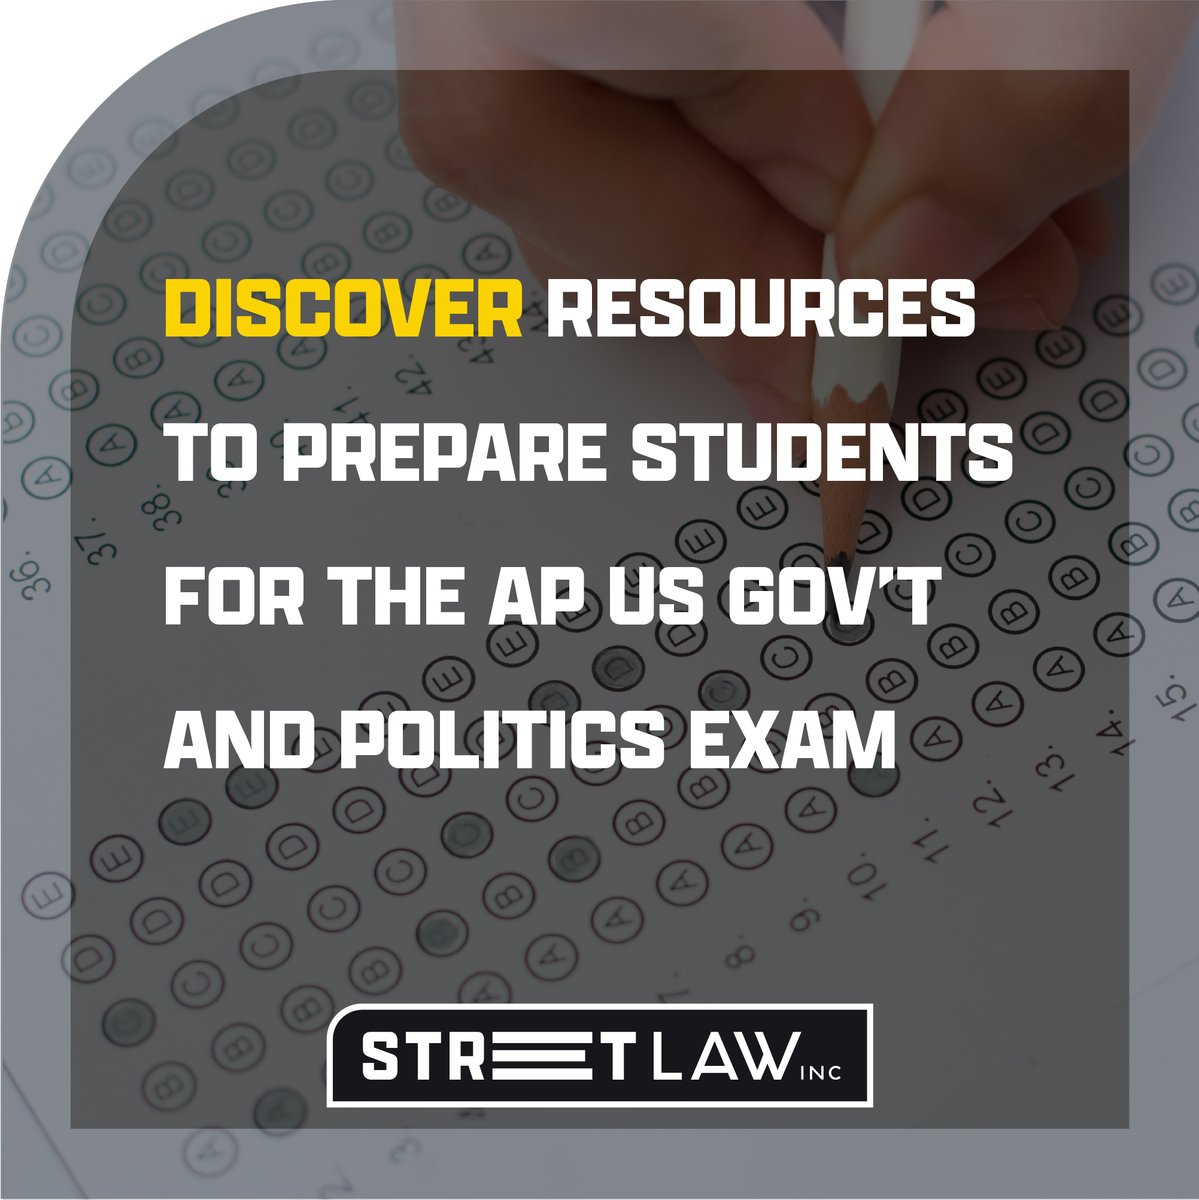 In the midst of AP U.S. Govt and Politics exam prep and need a hand? Street Law’s got you covered! These essential tools will help educators prepare their students for the exam. streetlaw.org/resources-for-…